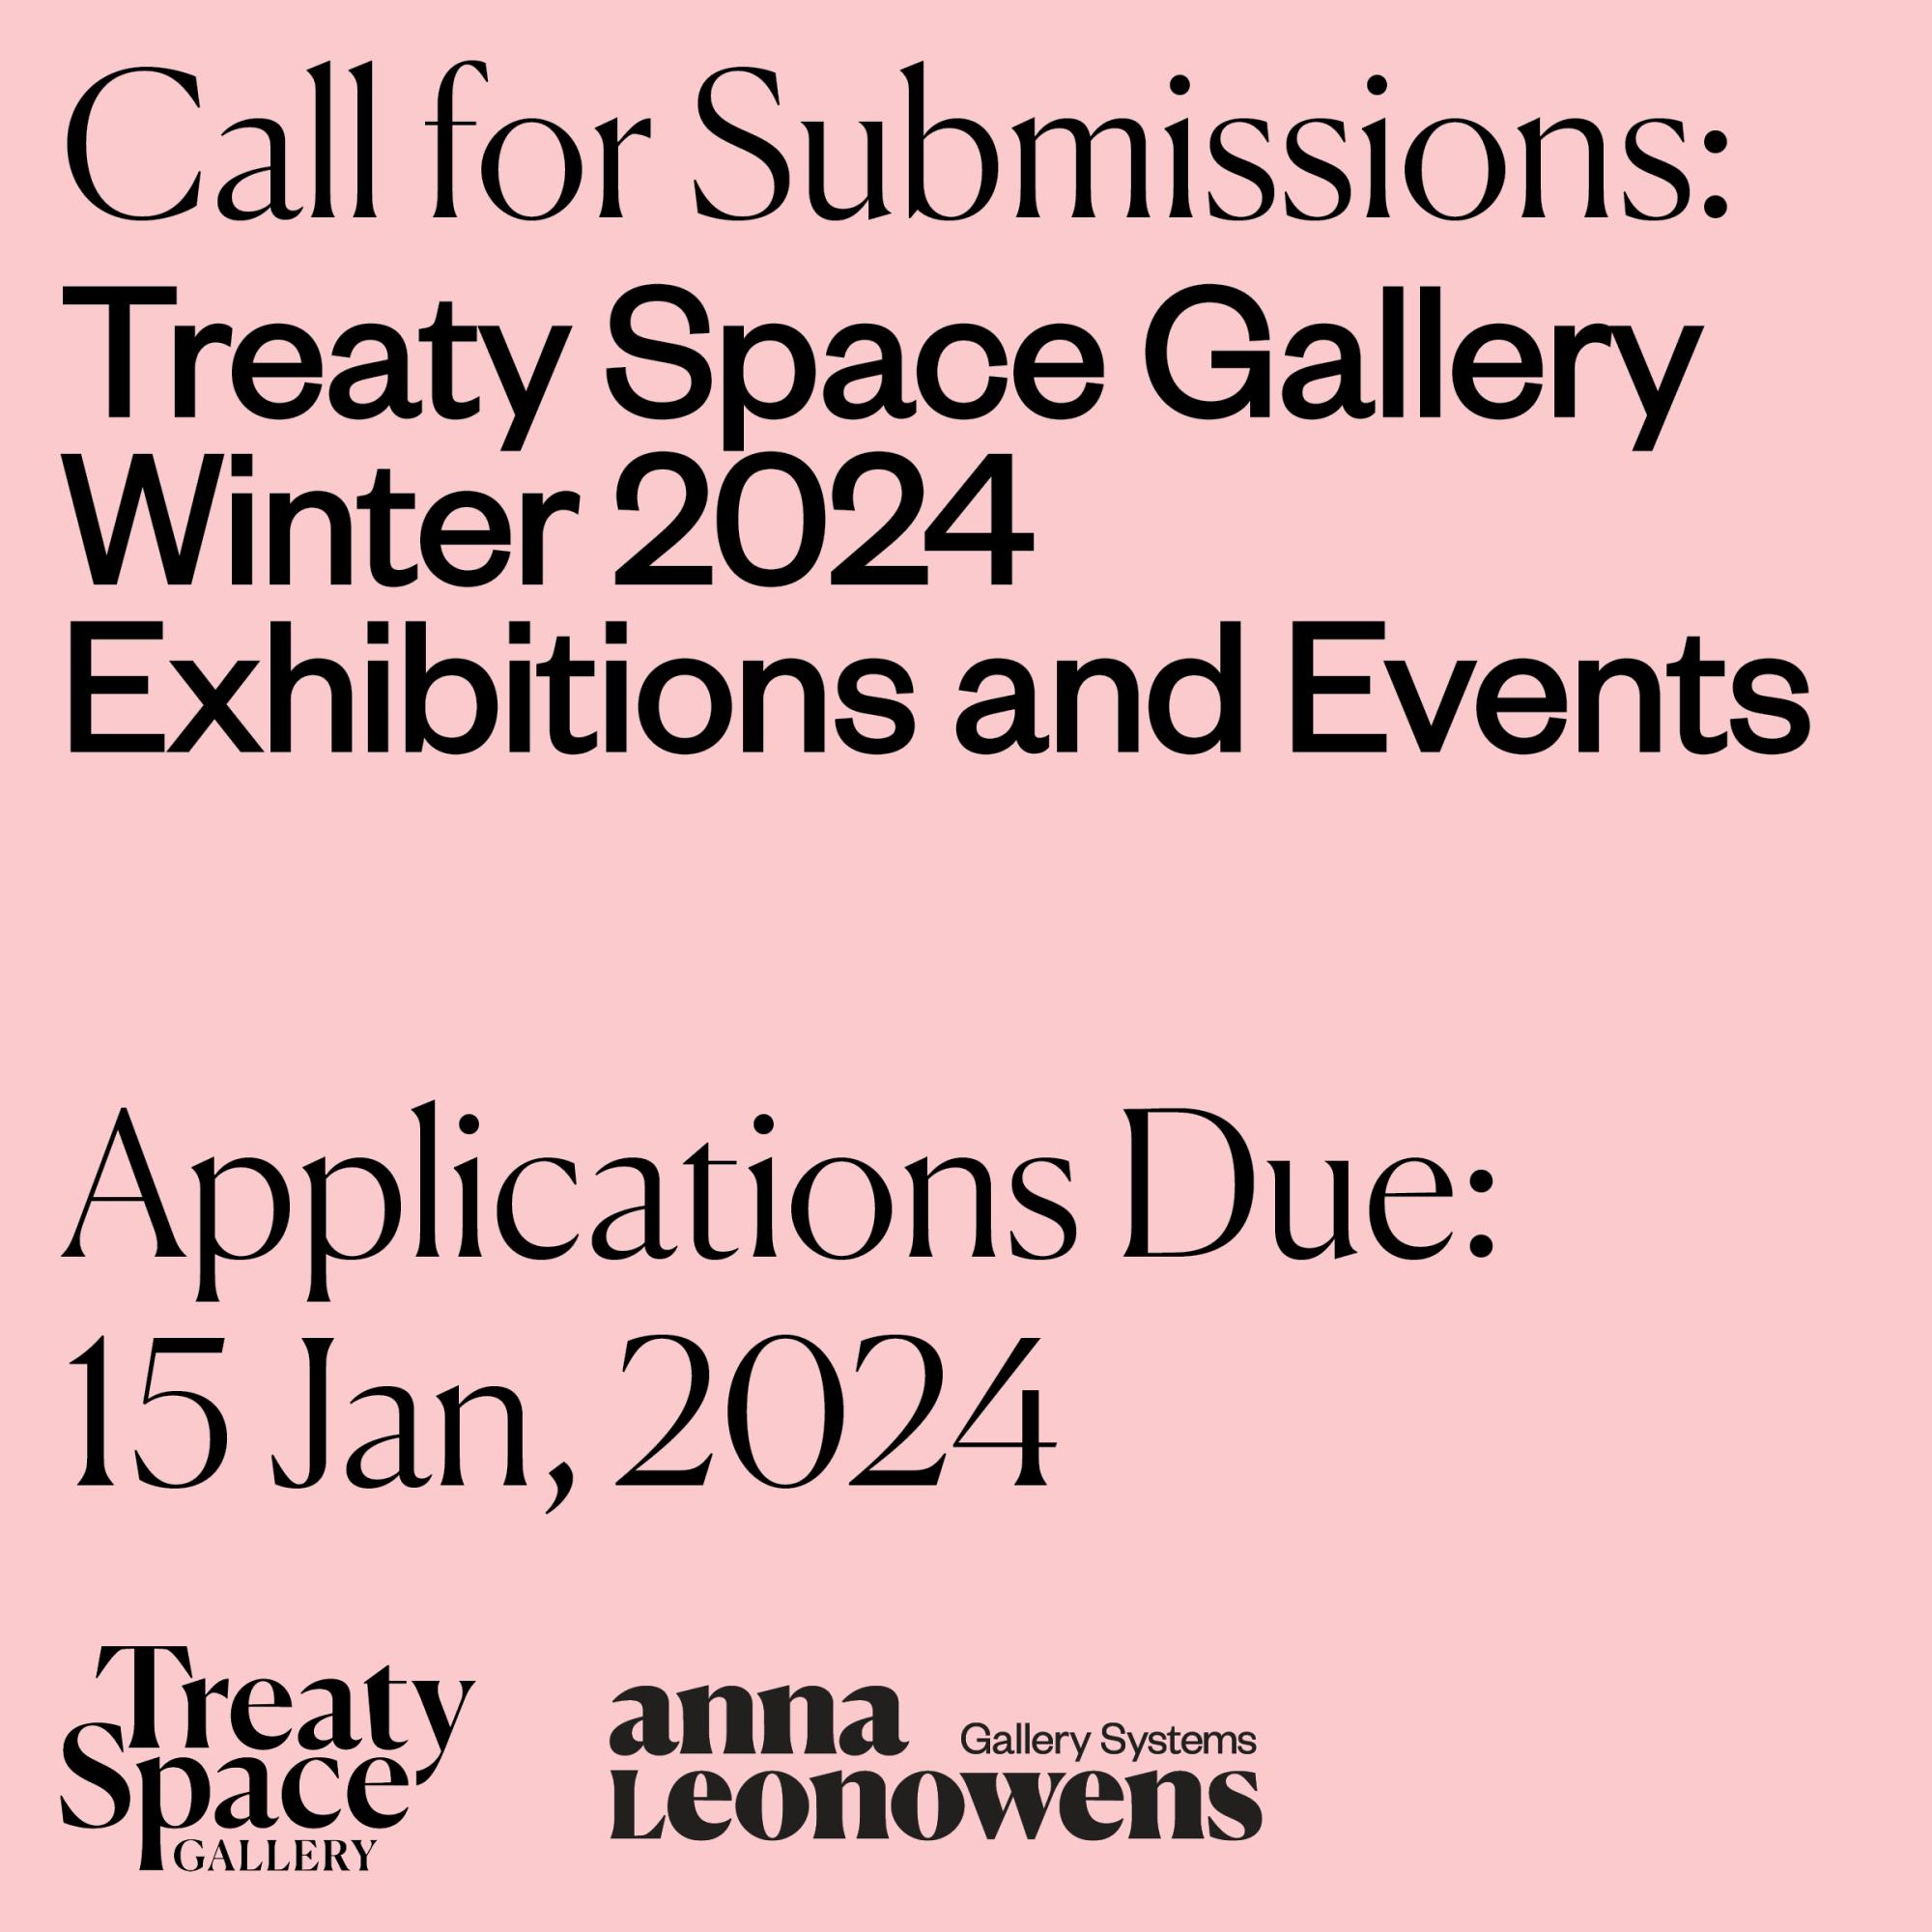 [ID: “Black text on pink background that reads Call for Submissions: Treaty Space Gallery Winter 2024 Exhibitions and Events, Applications Due: 15 Jan, 2024. At the bottom is the Treaty Space Gallery logo and the Anna Leonowens Gallery logo.”] 